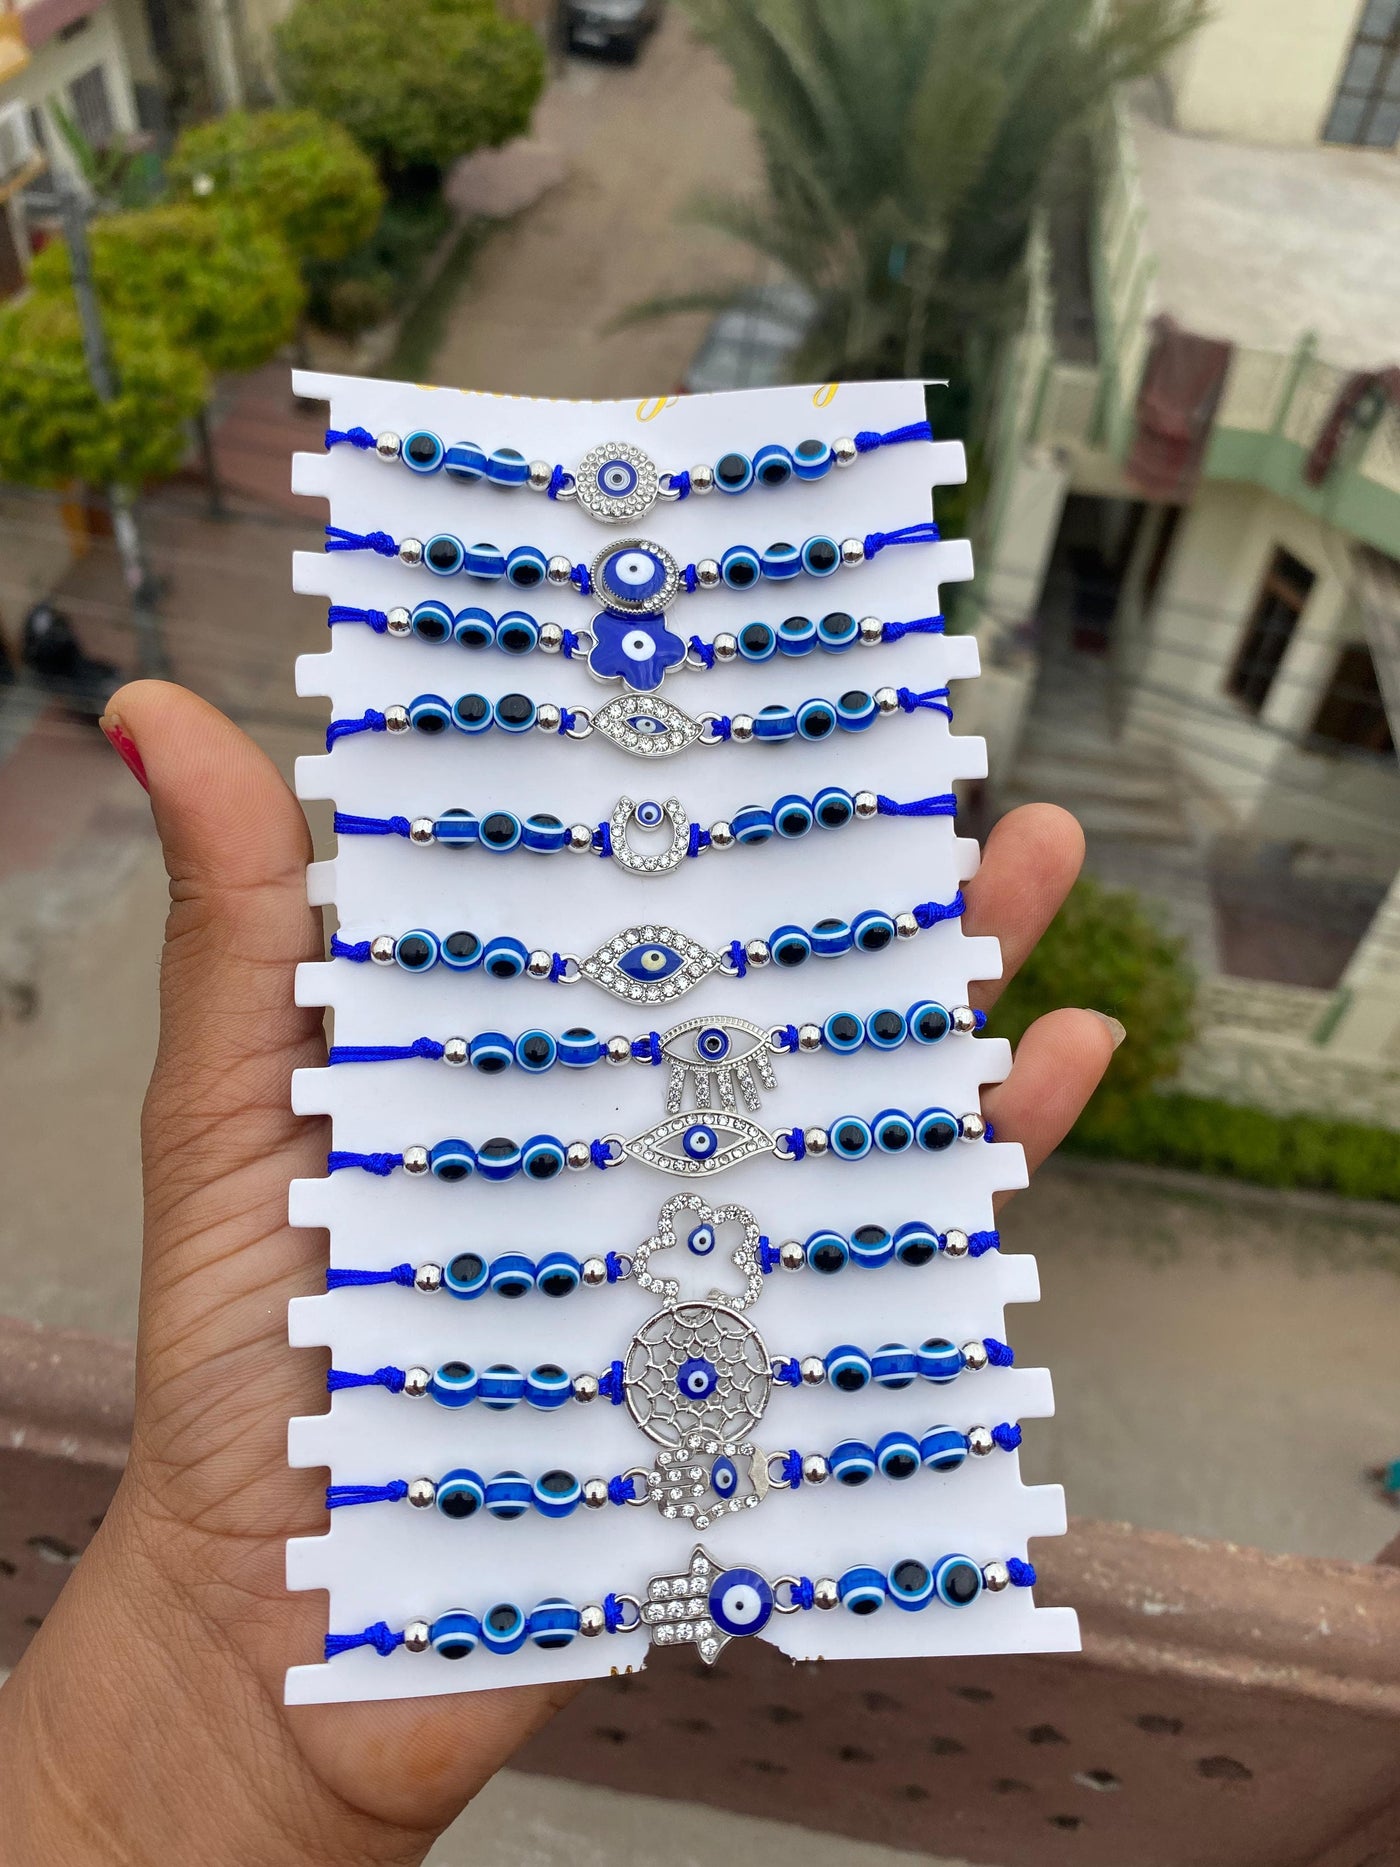 540 Rs each patta on buying 10+ patta's / WhatsApp at 8619550223 to order Rakhi Ready Pack of 12 Designer Evil eye 🧿 Rakhi's for brother's, sisters bhabhi's or bridesmaids